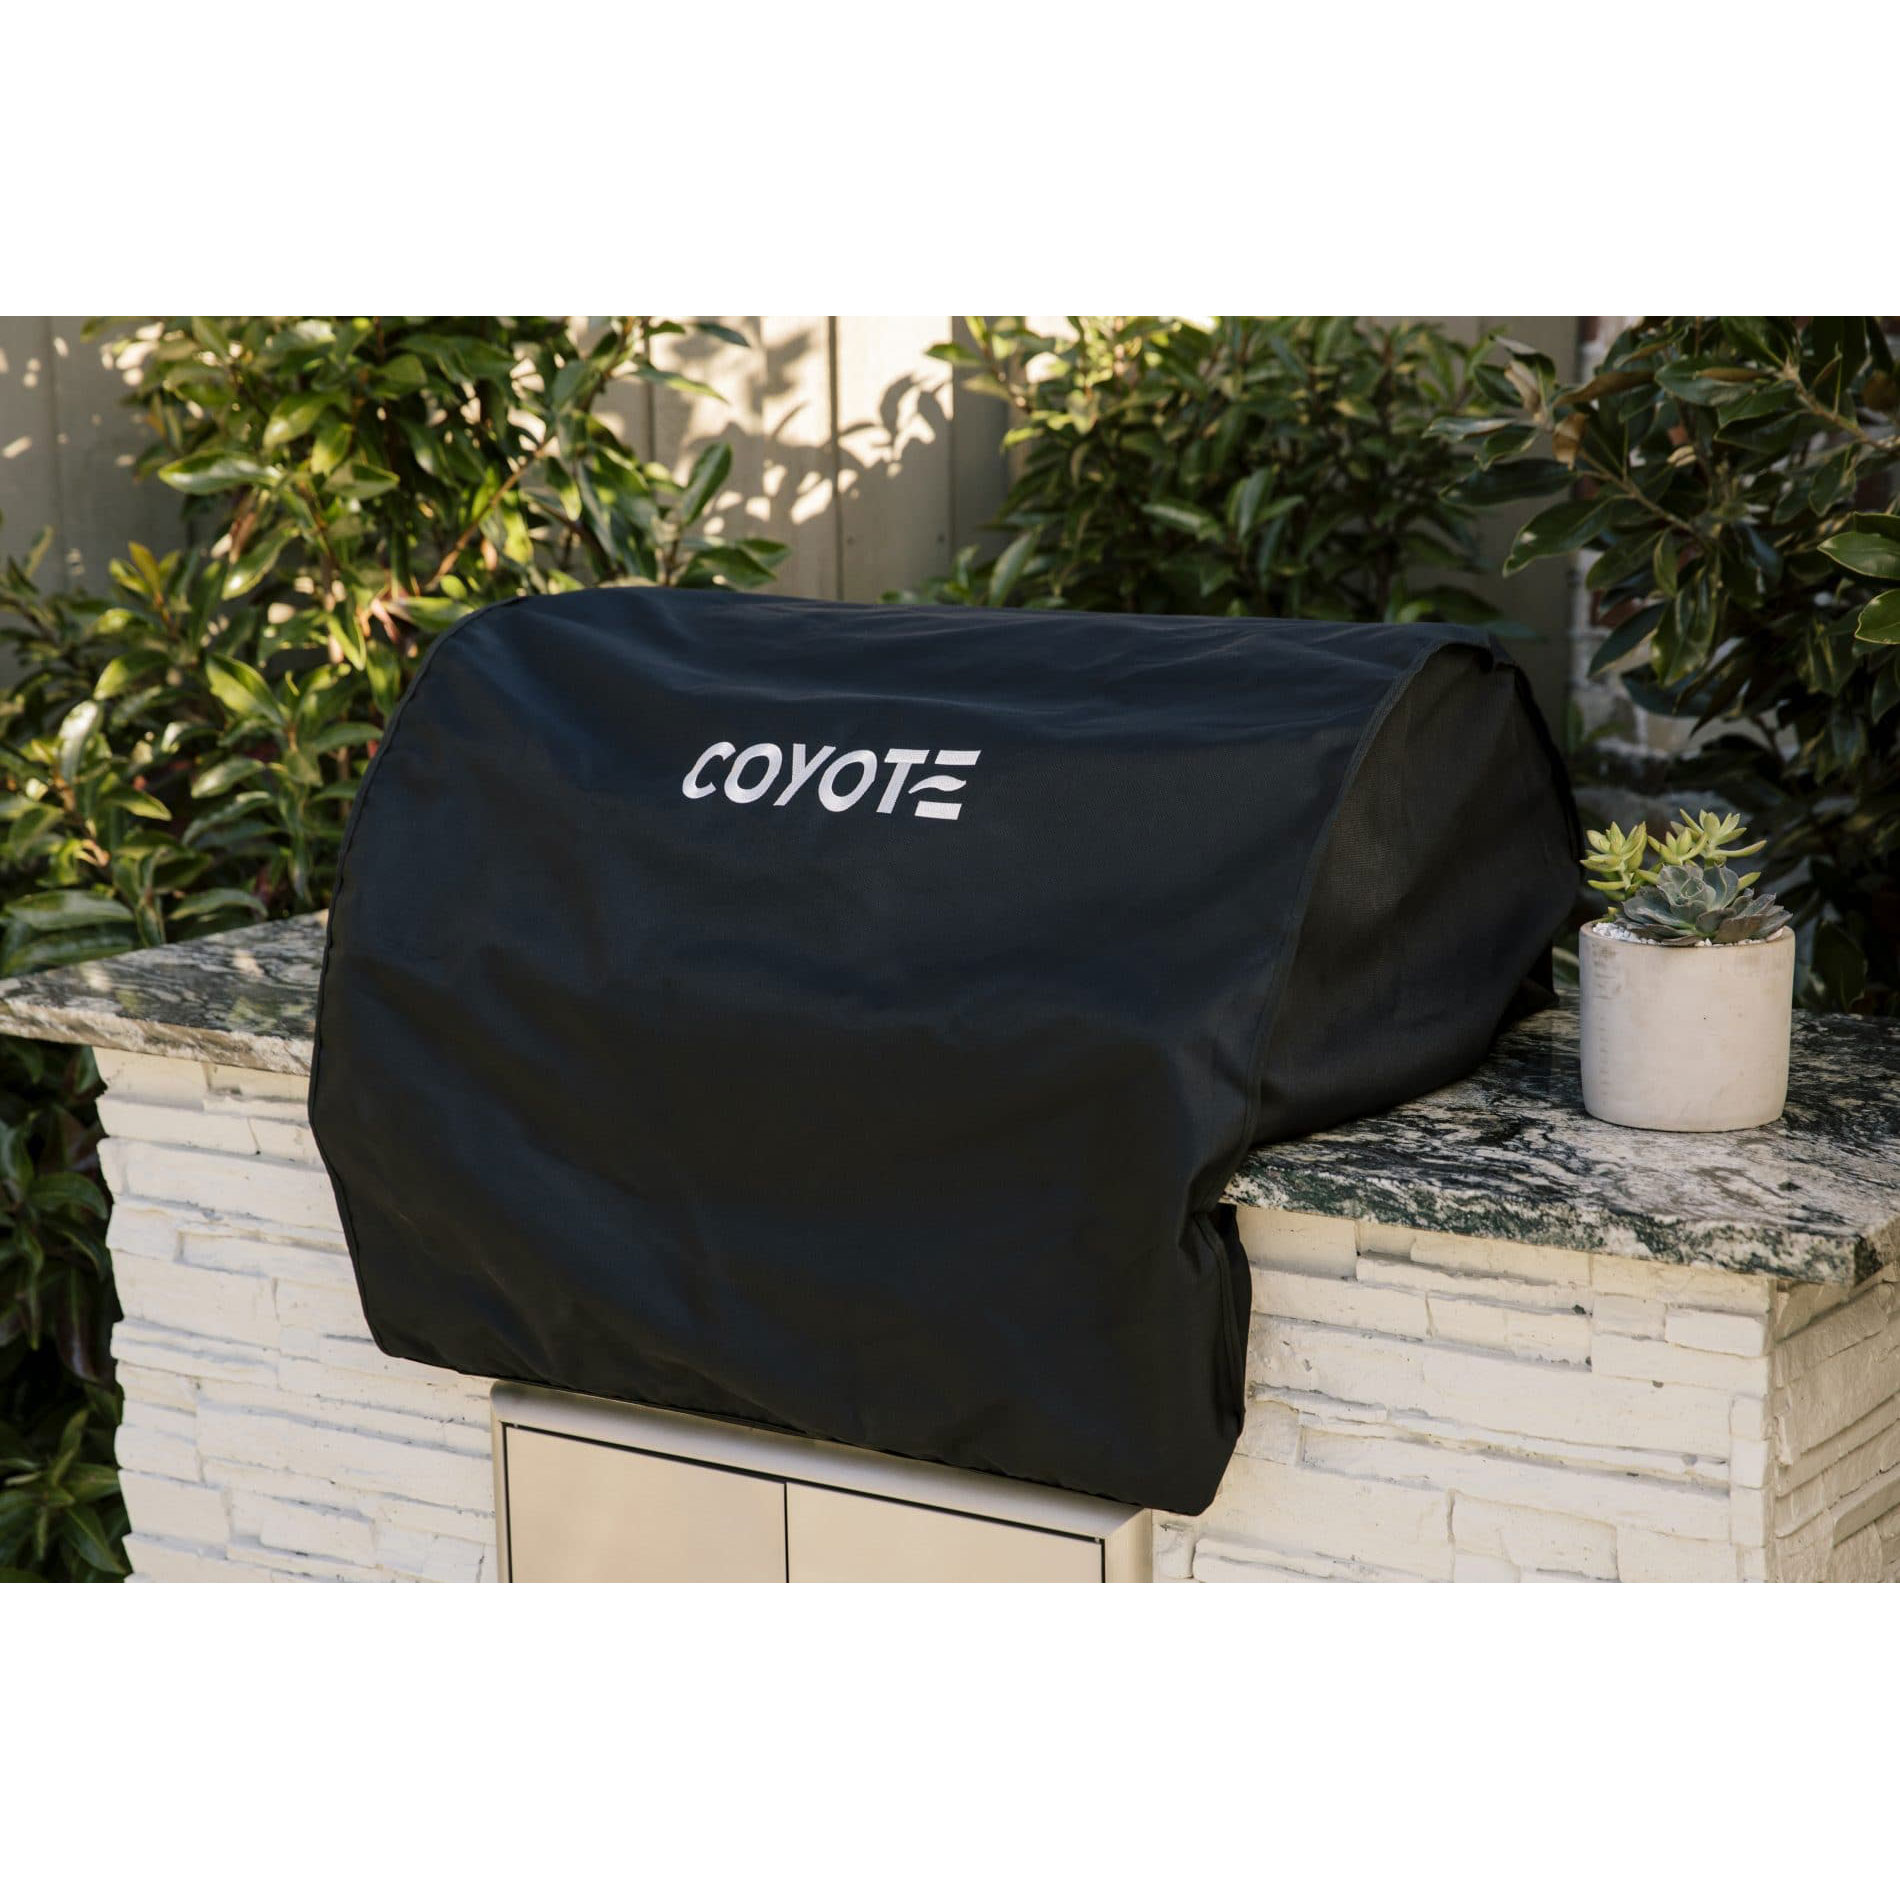 Coyote Outdoors 36 In Vinyl Protective Built In BBQ Barbecue Grill Cover, Black - image 2 of 2